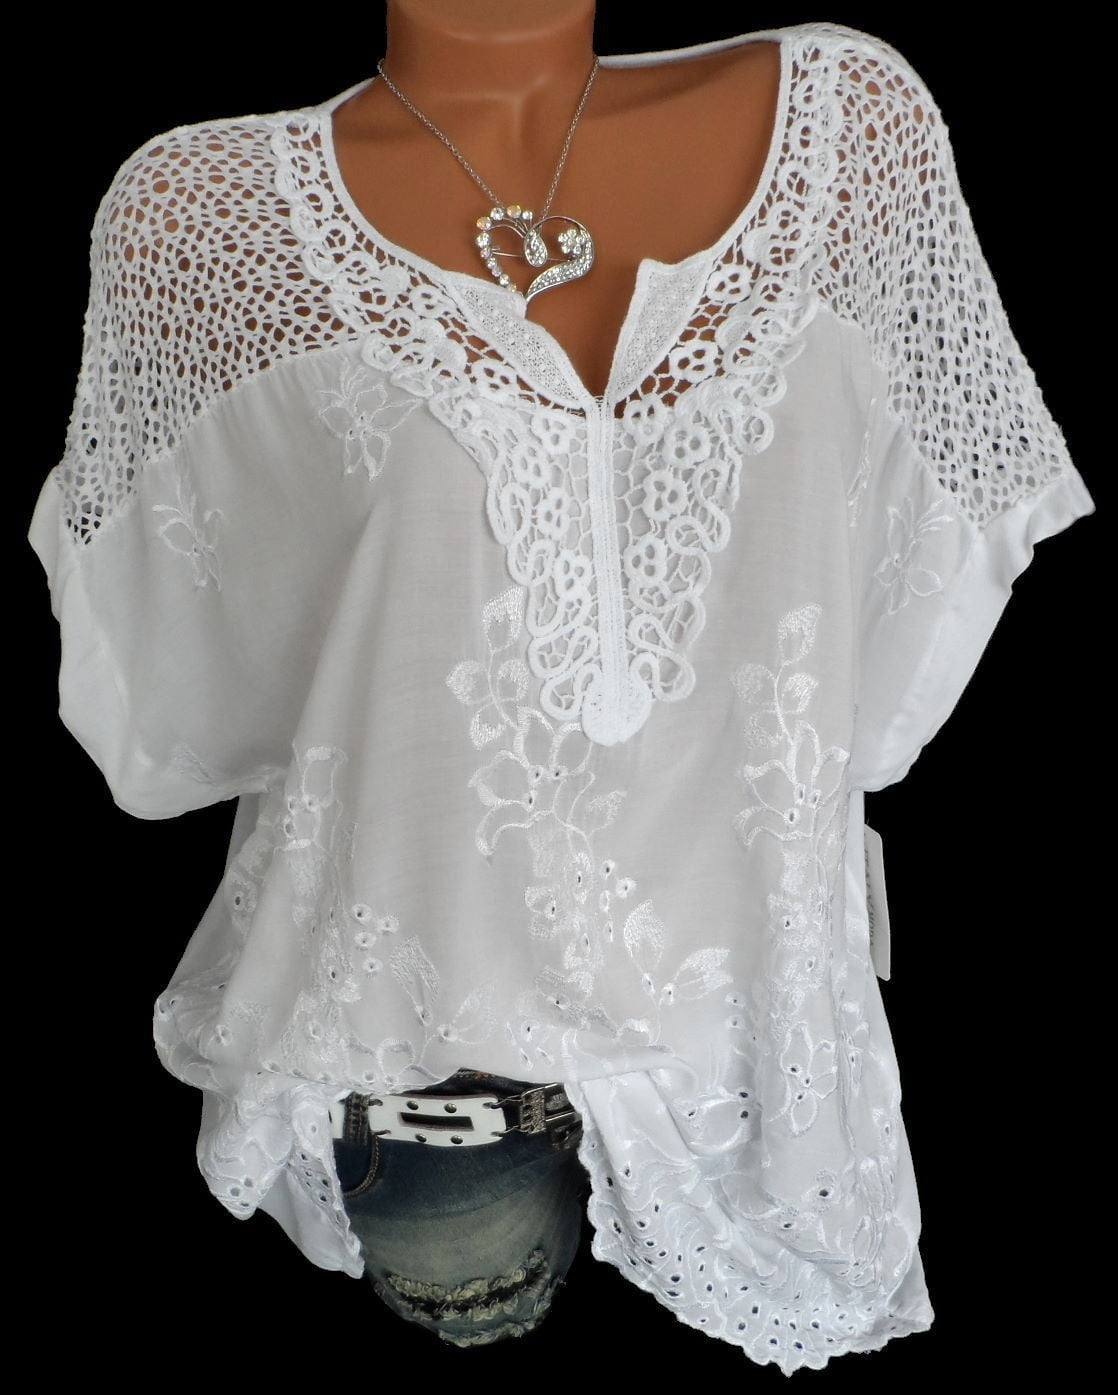 Lace Stitching Women Casual Plus Size Loose Blouse Tops - Walmart.com